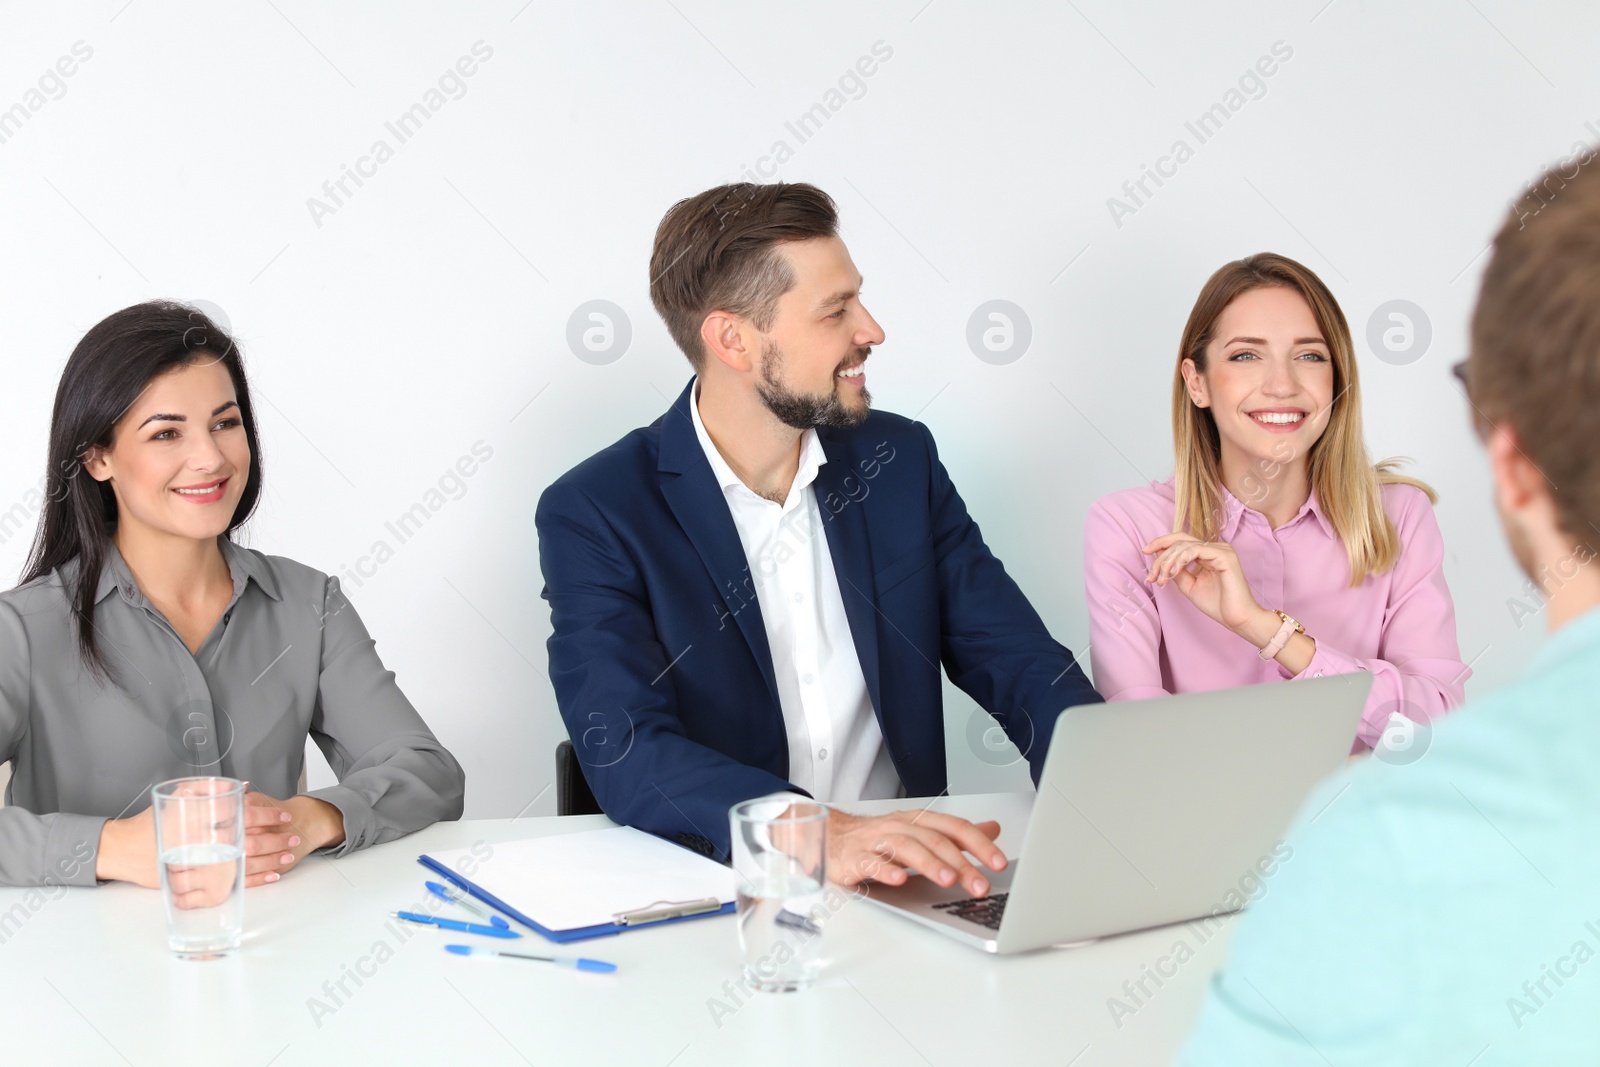 Photo of Human resources commission conducting job interview with applicant in office